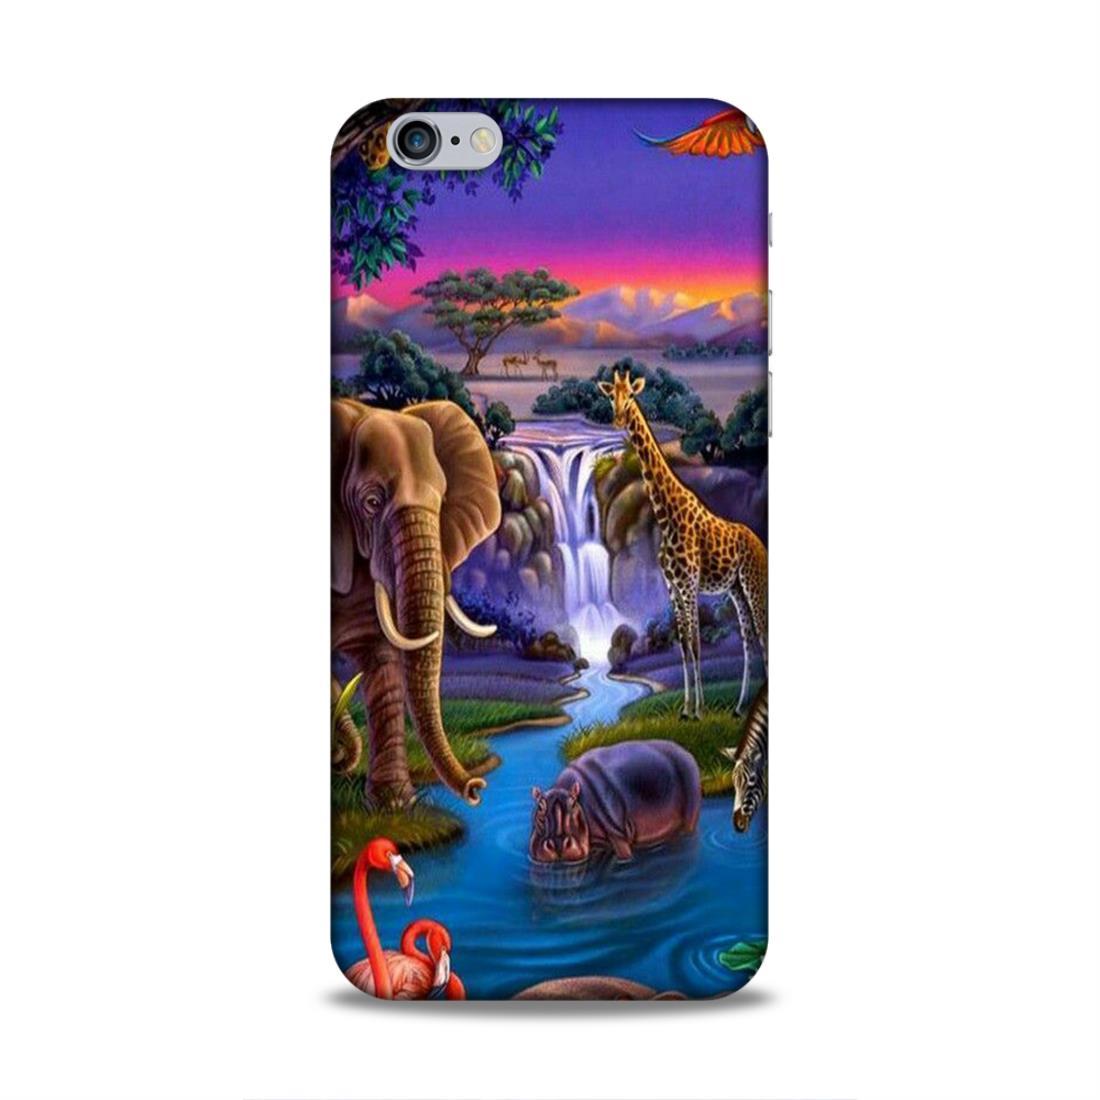 Jungle Art iPhone 6s Mobile Cover